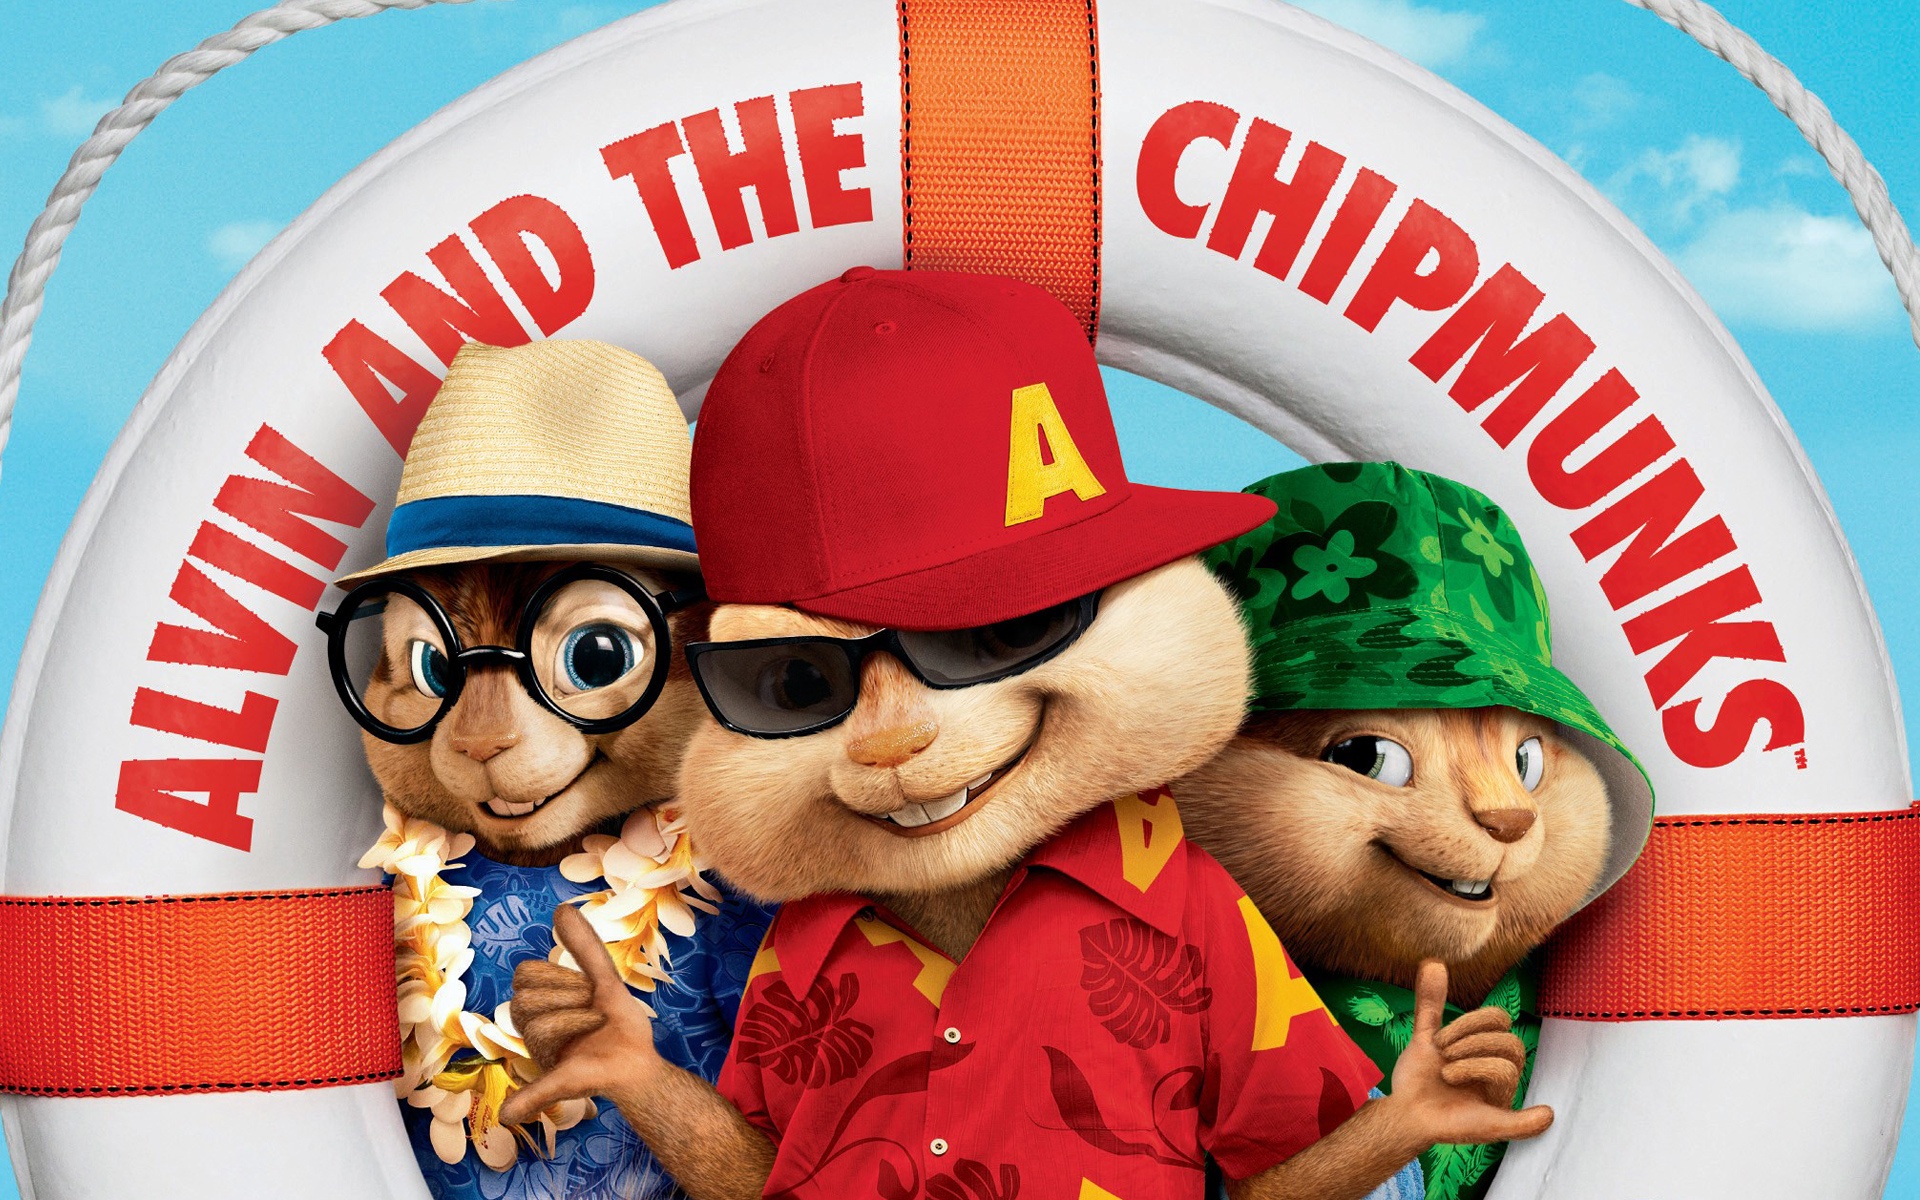 Alvin And The Chipmunks 3